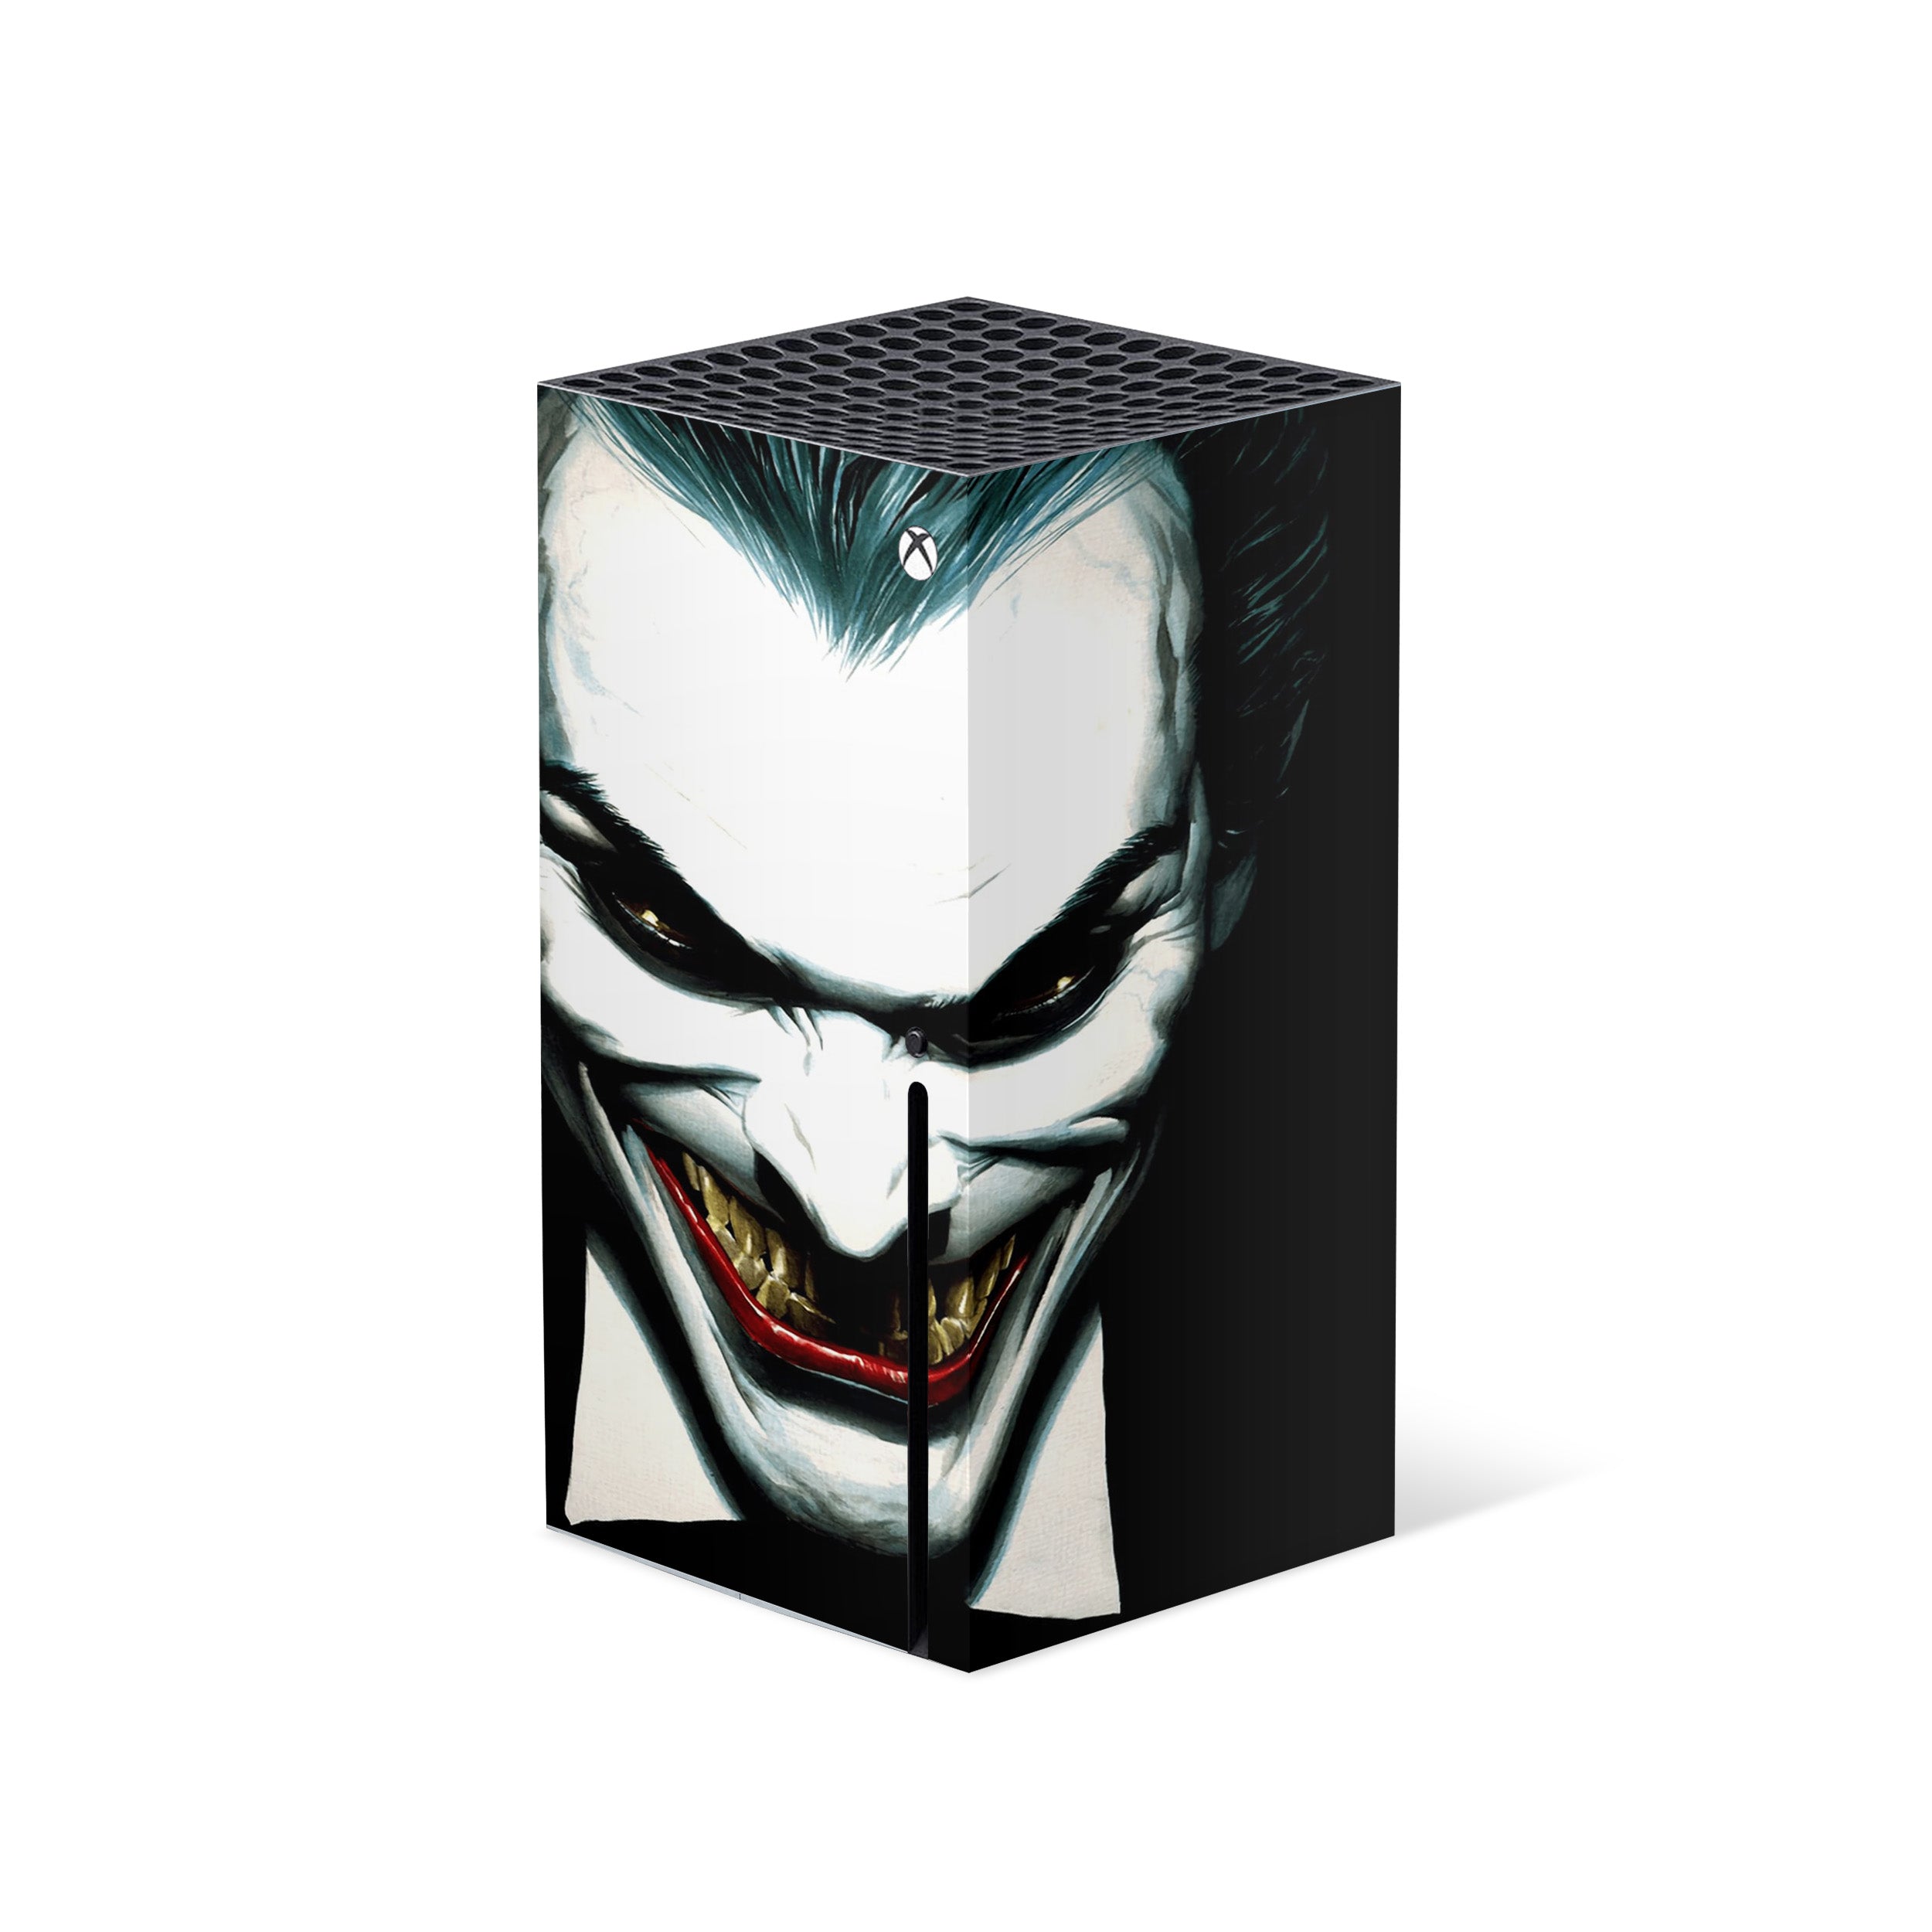 A video game skin featuring a DC Joker design for the Xbox Series X.